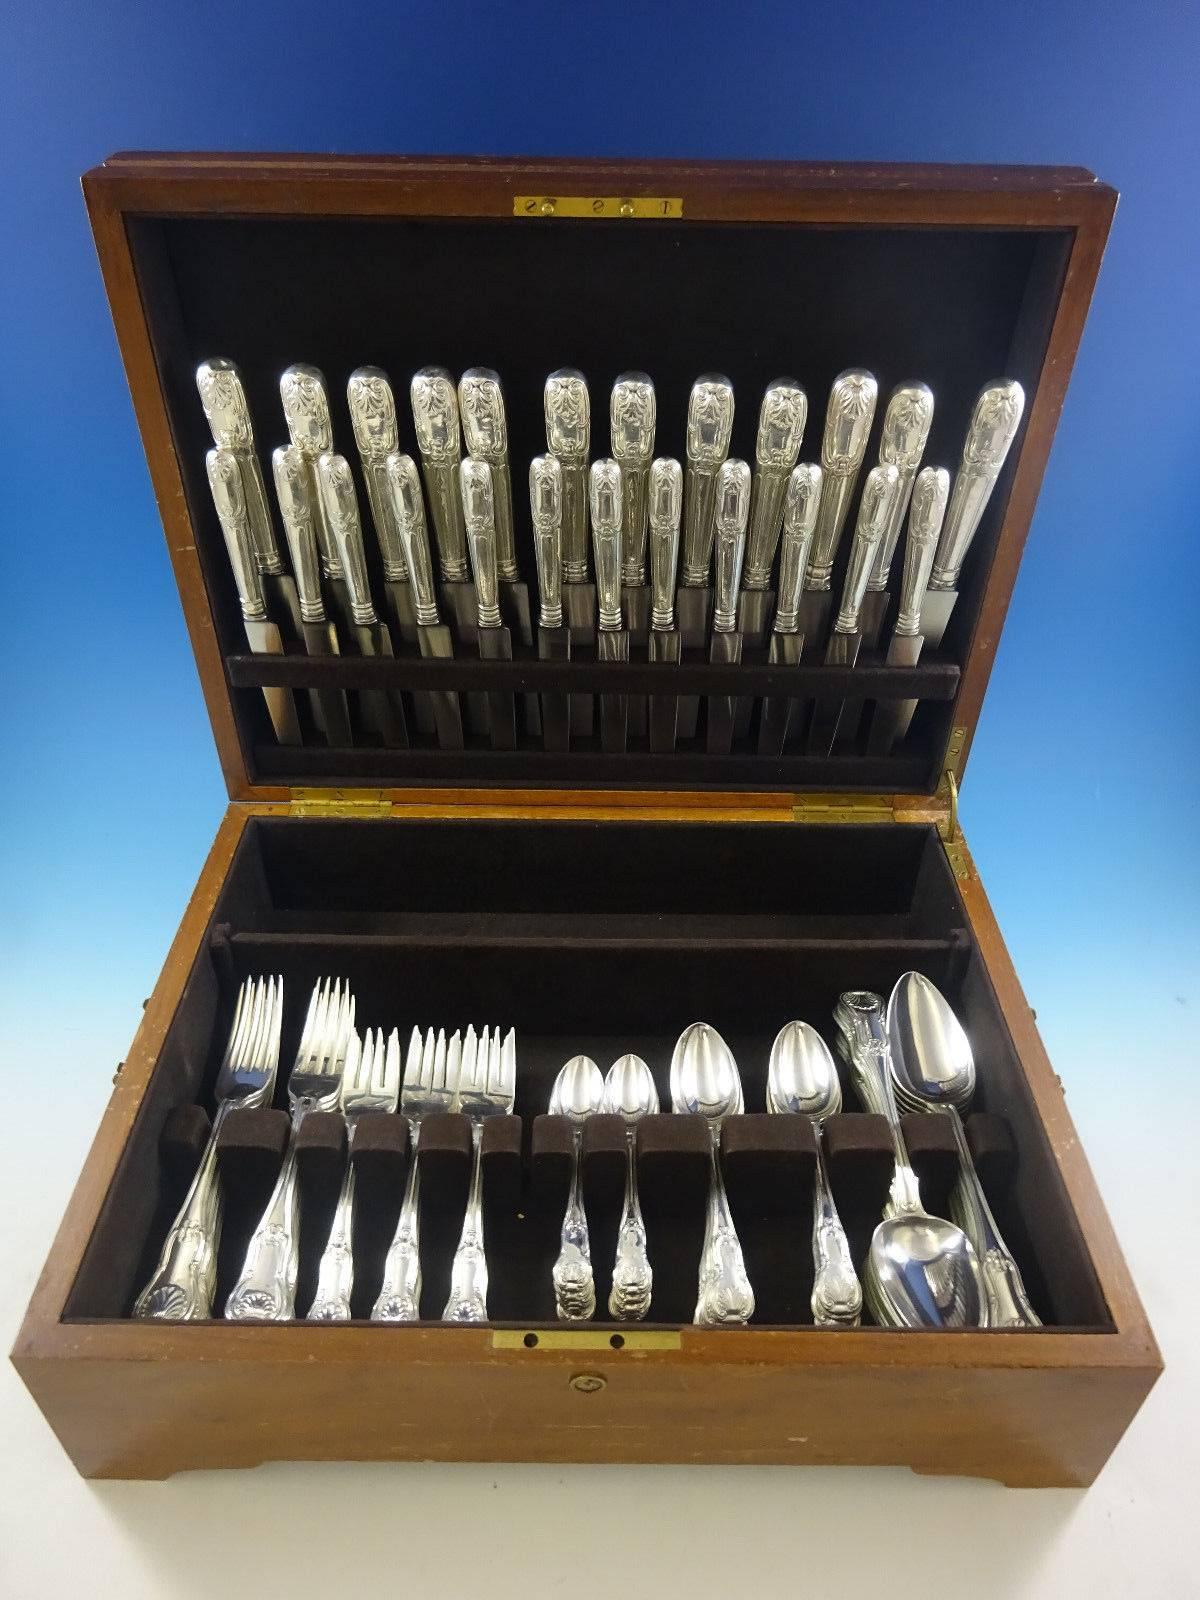 Kings shell motif English sterling silver flatware set, 84 pieces. This set includes: 

12 banquet knives with blunt stainless blades, 10 5/8